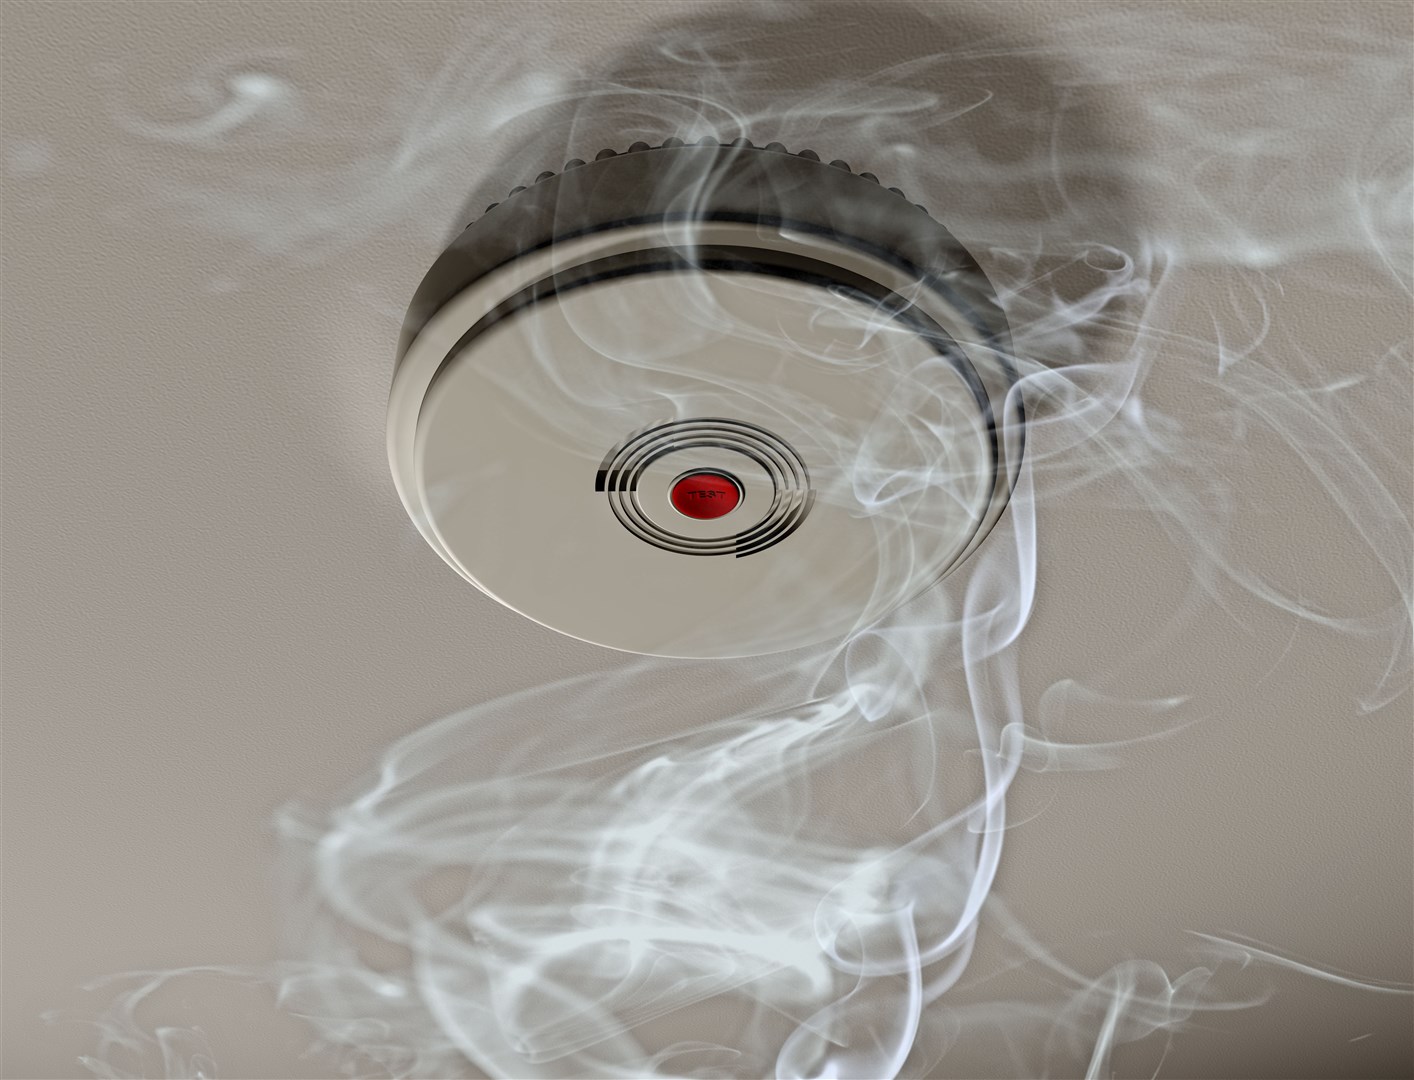 The new legislation raises the standard of fire safety within the homes.